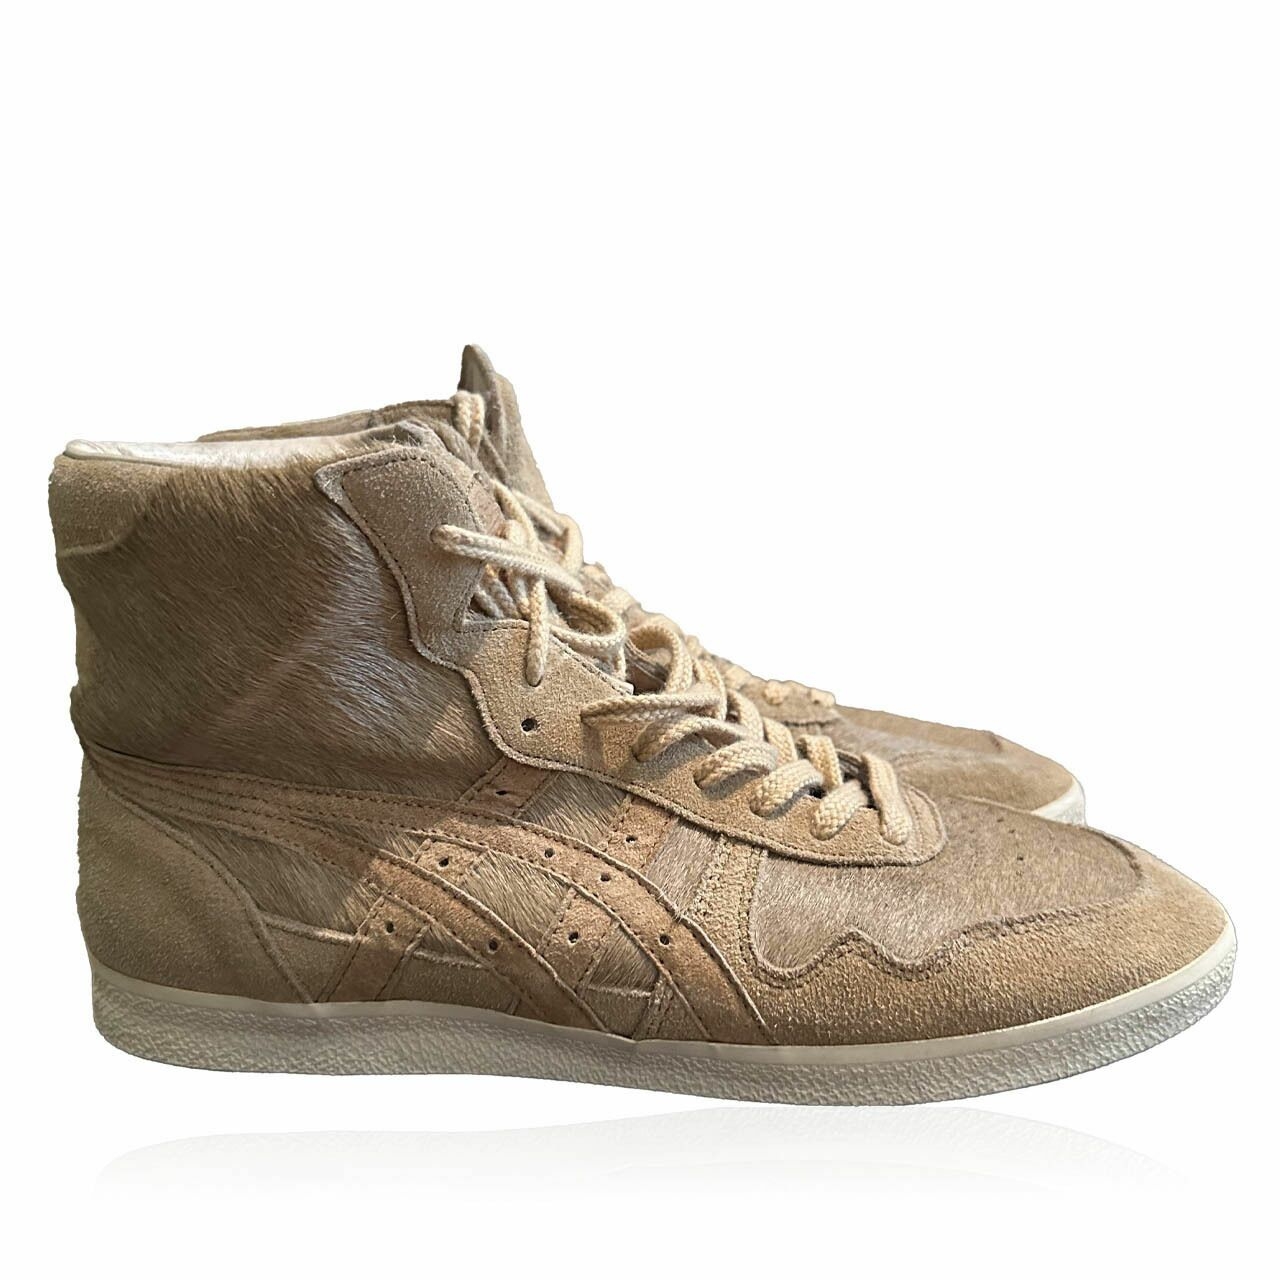 Onitsuka Tiger high Top Beige Sneakers